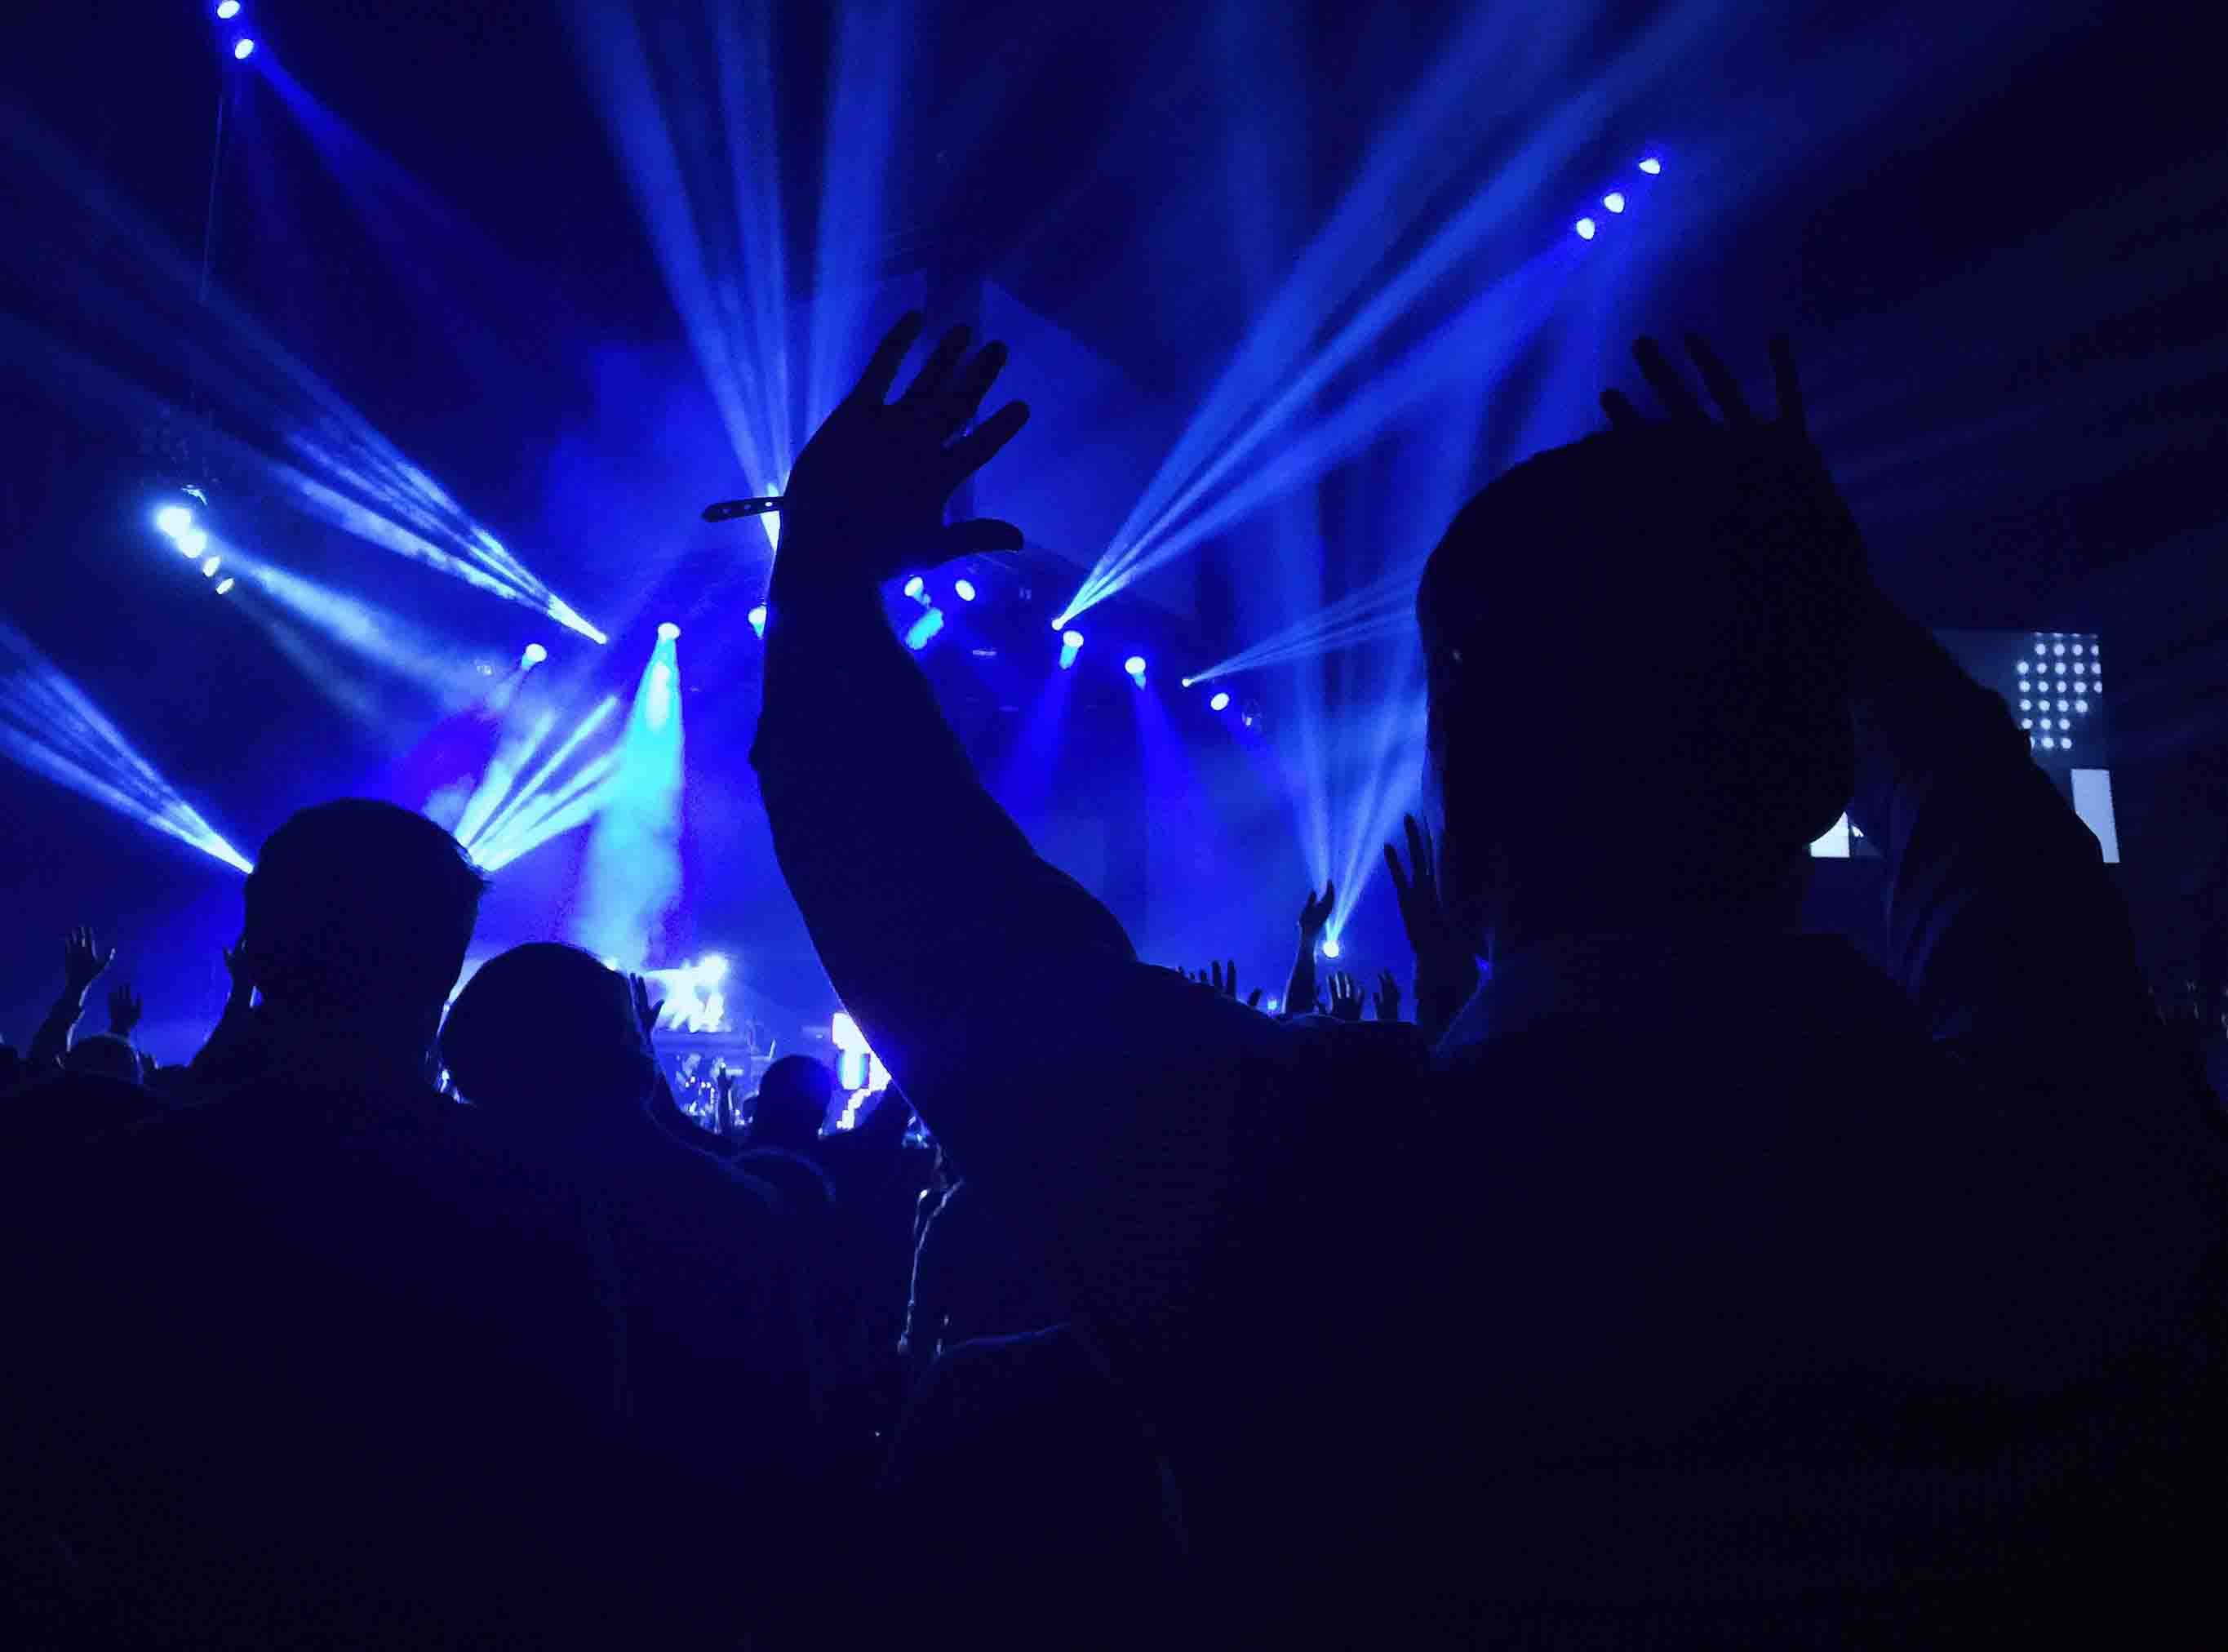 Spectators at a concert with their hands in the air